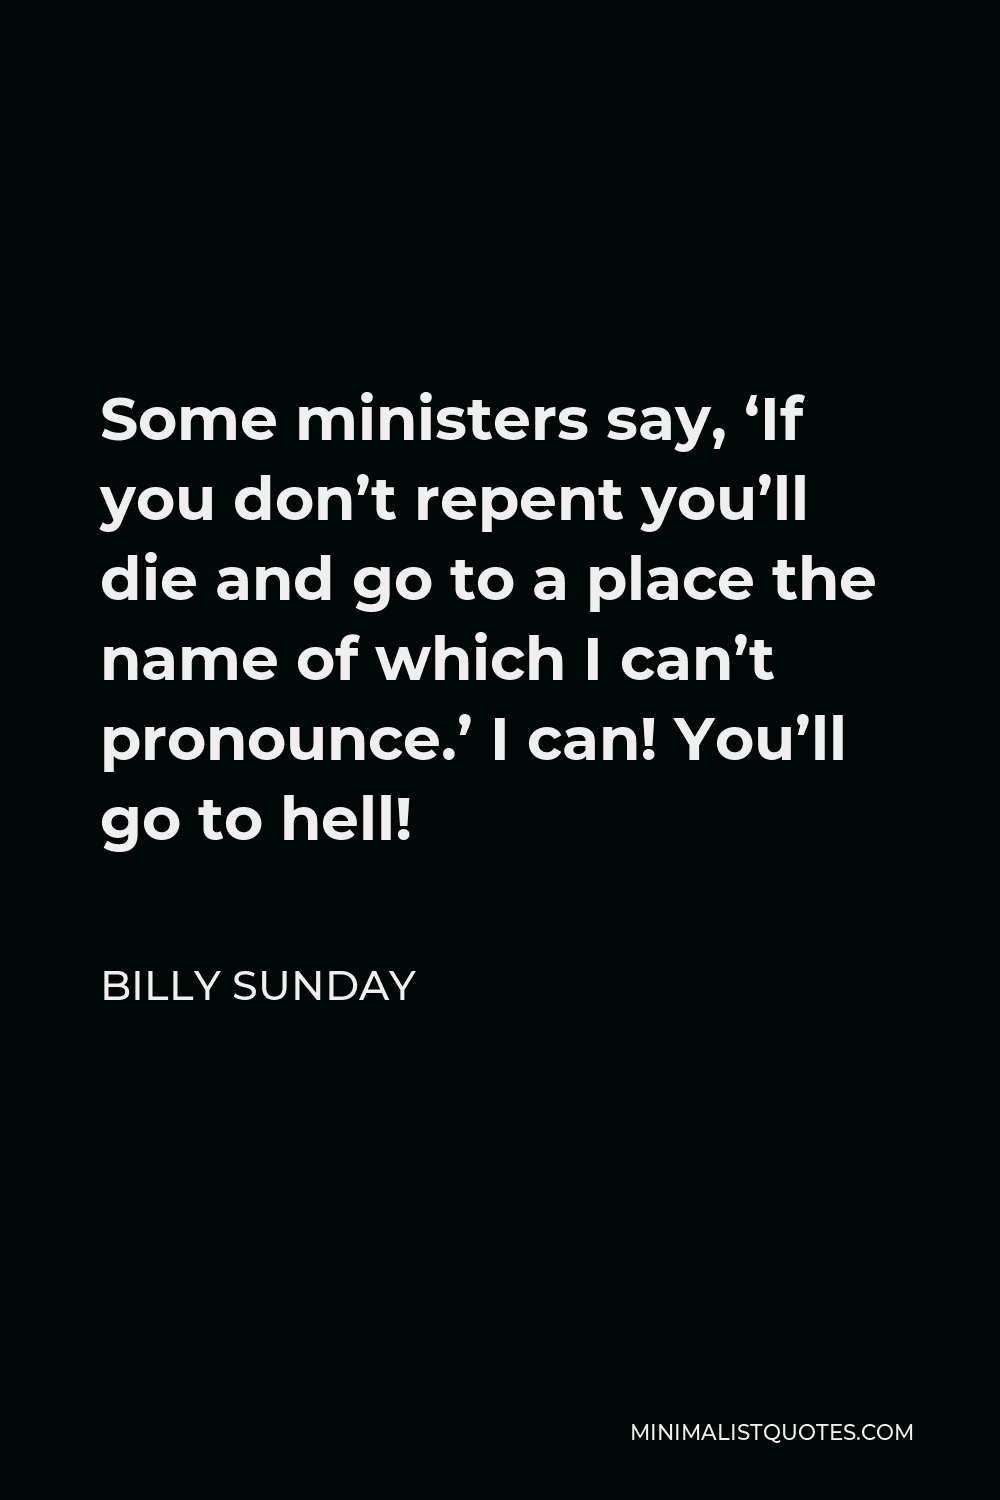 Billy Sunday Quote - Some ministers say, ‘If you don’t repent you’ll die and go to a place the name of which I can’t pronounce.’ I can! You’ll go to hell!